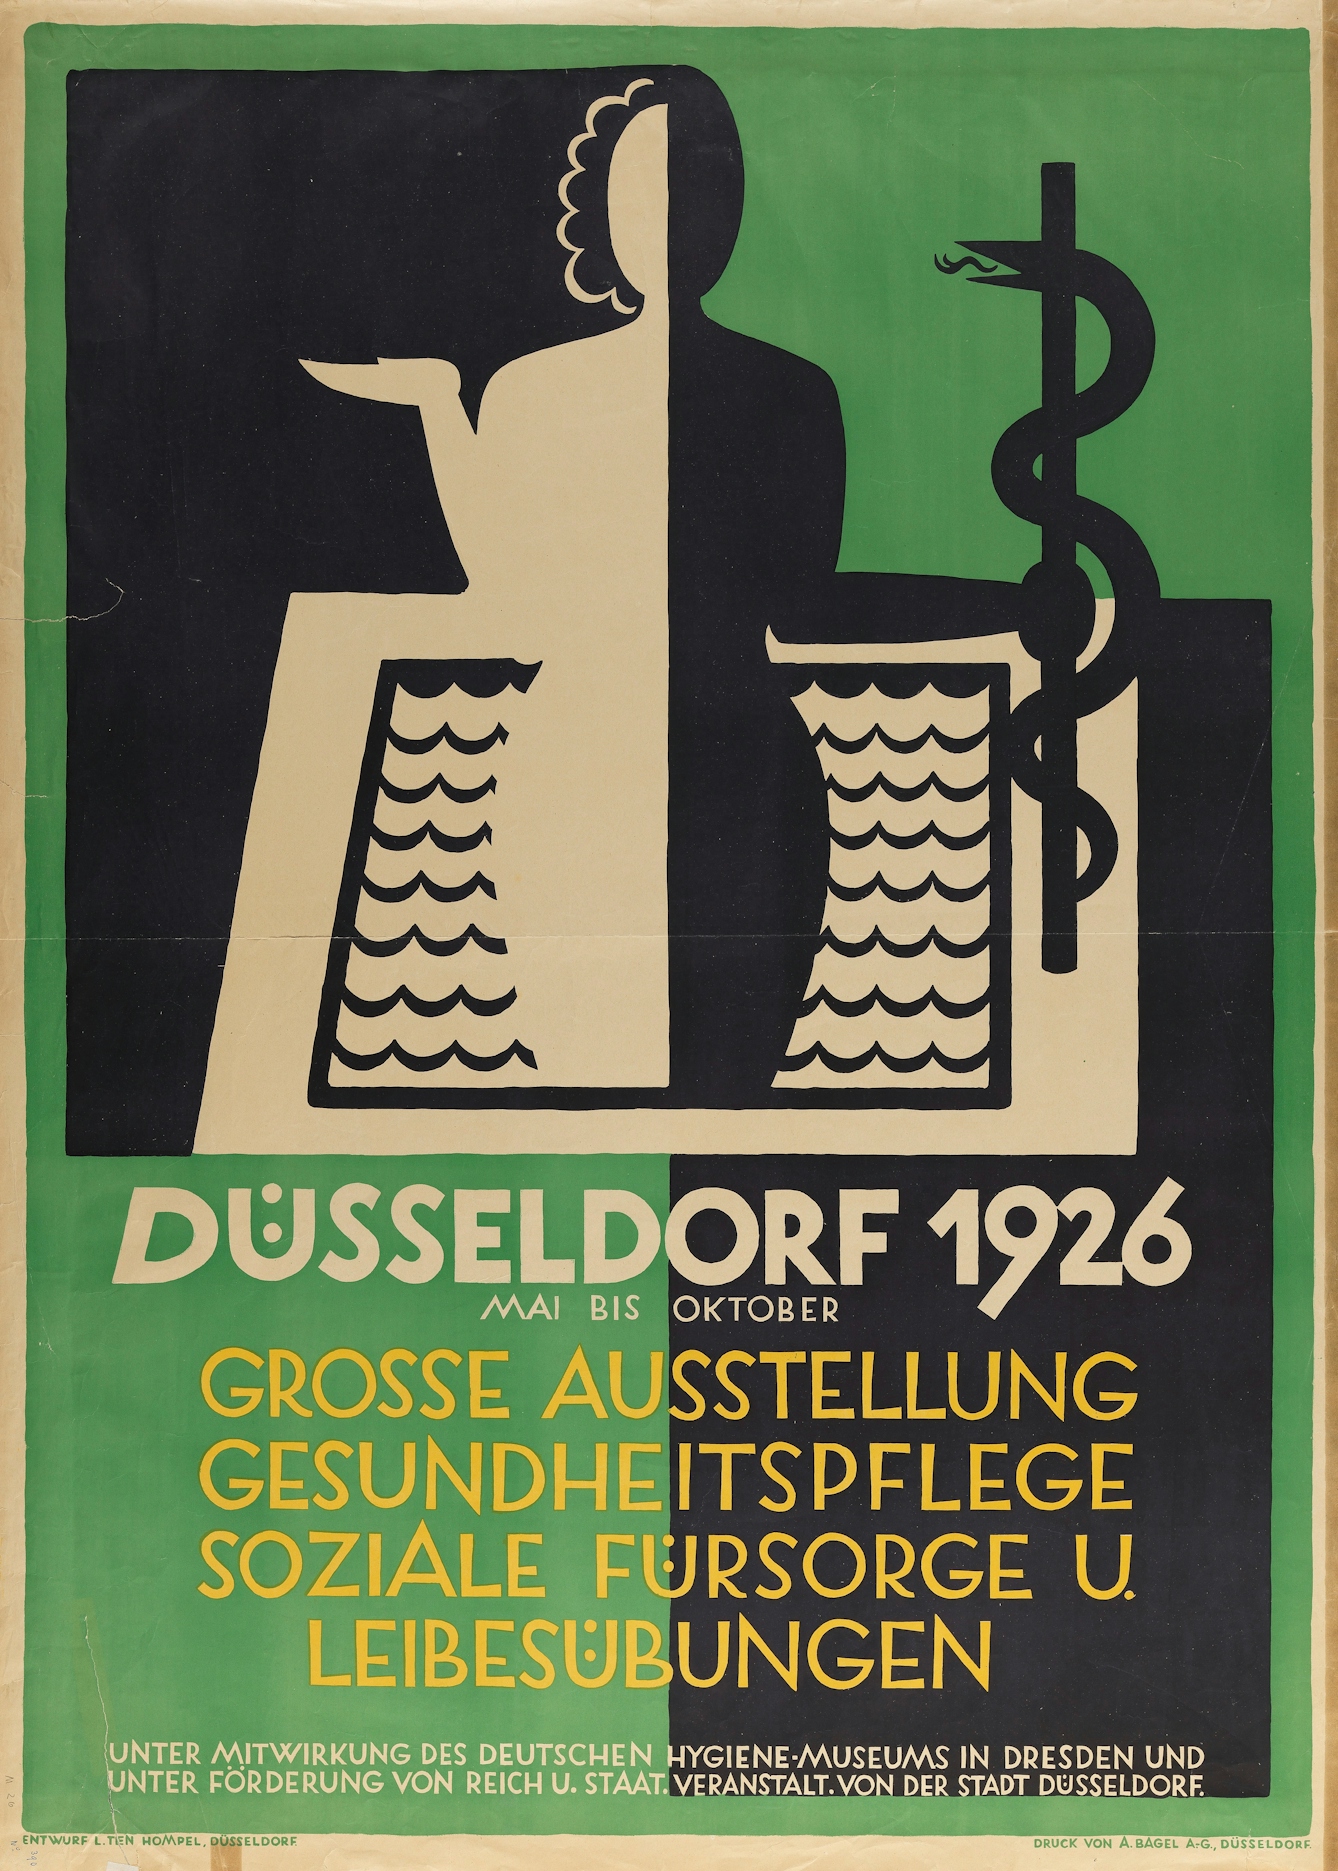 Poster for a health exhibition in Dusseldorf, 1926 featuring a woman holding a staff with a snake entwined around it.